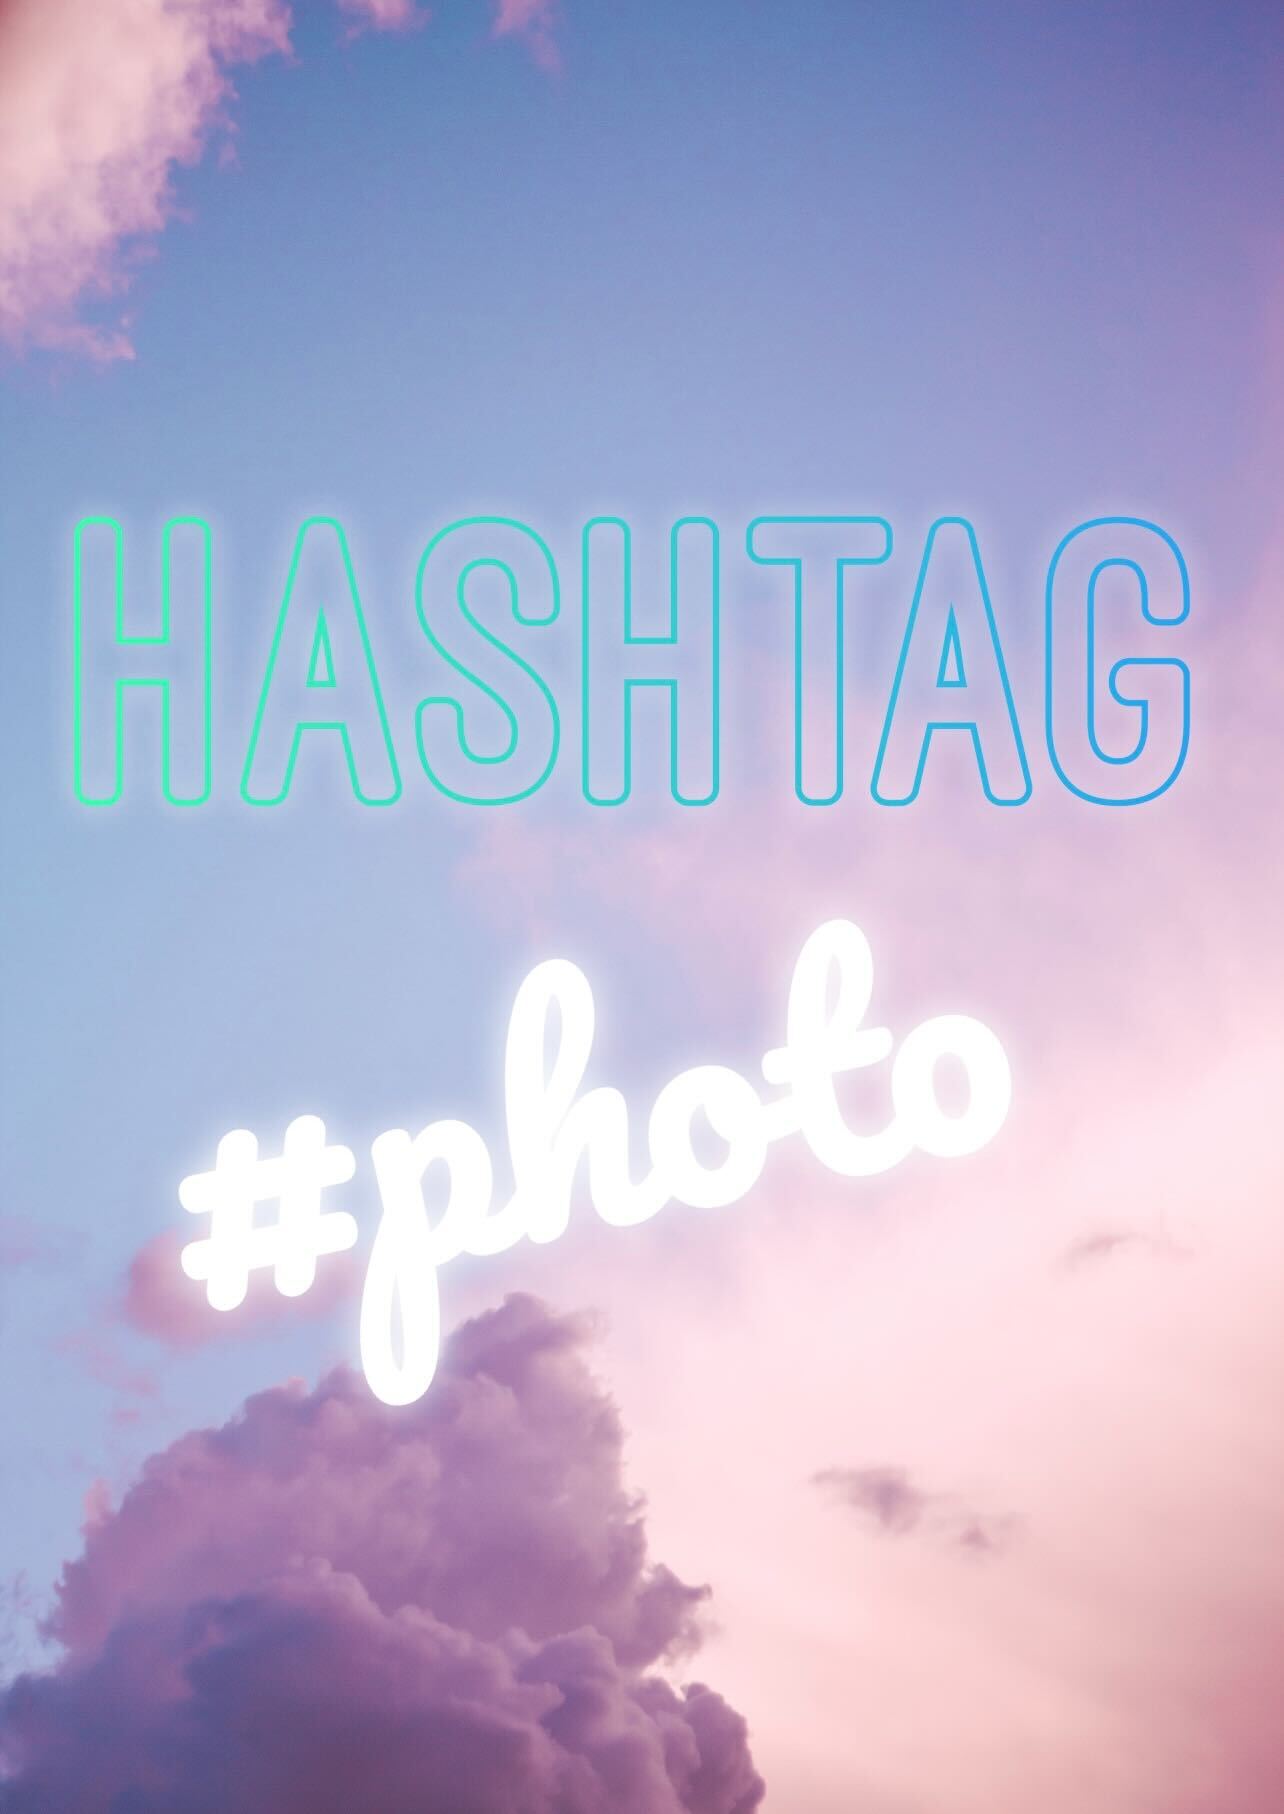 Photography hashtag ideas for Instagram